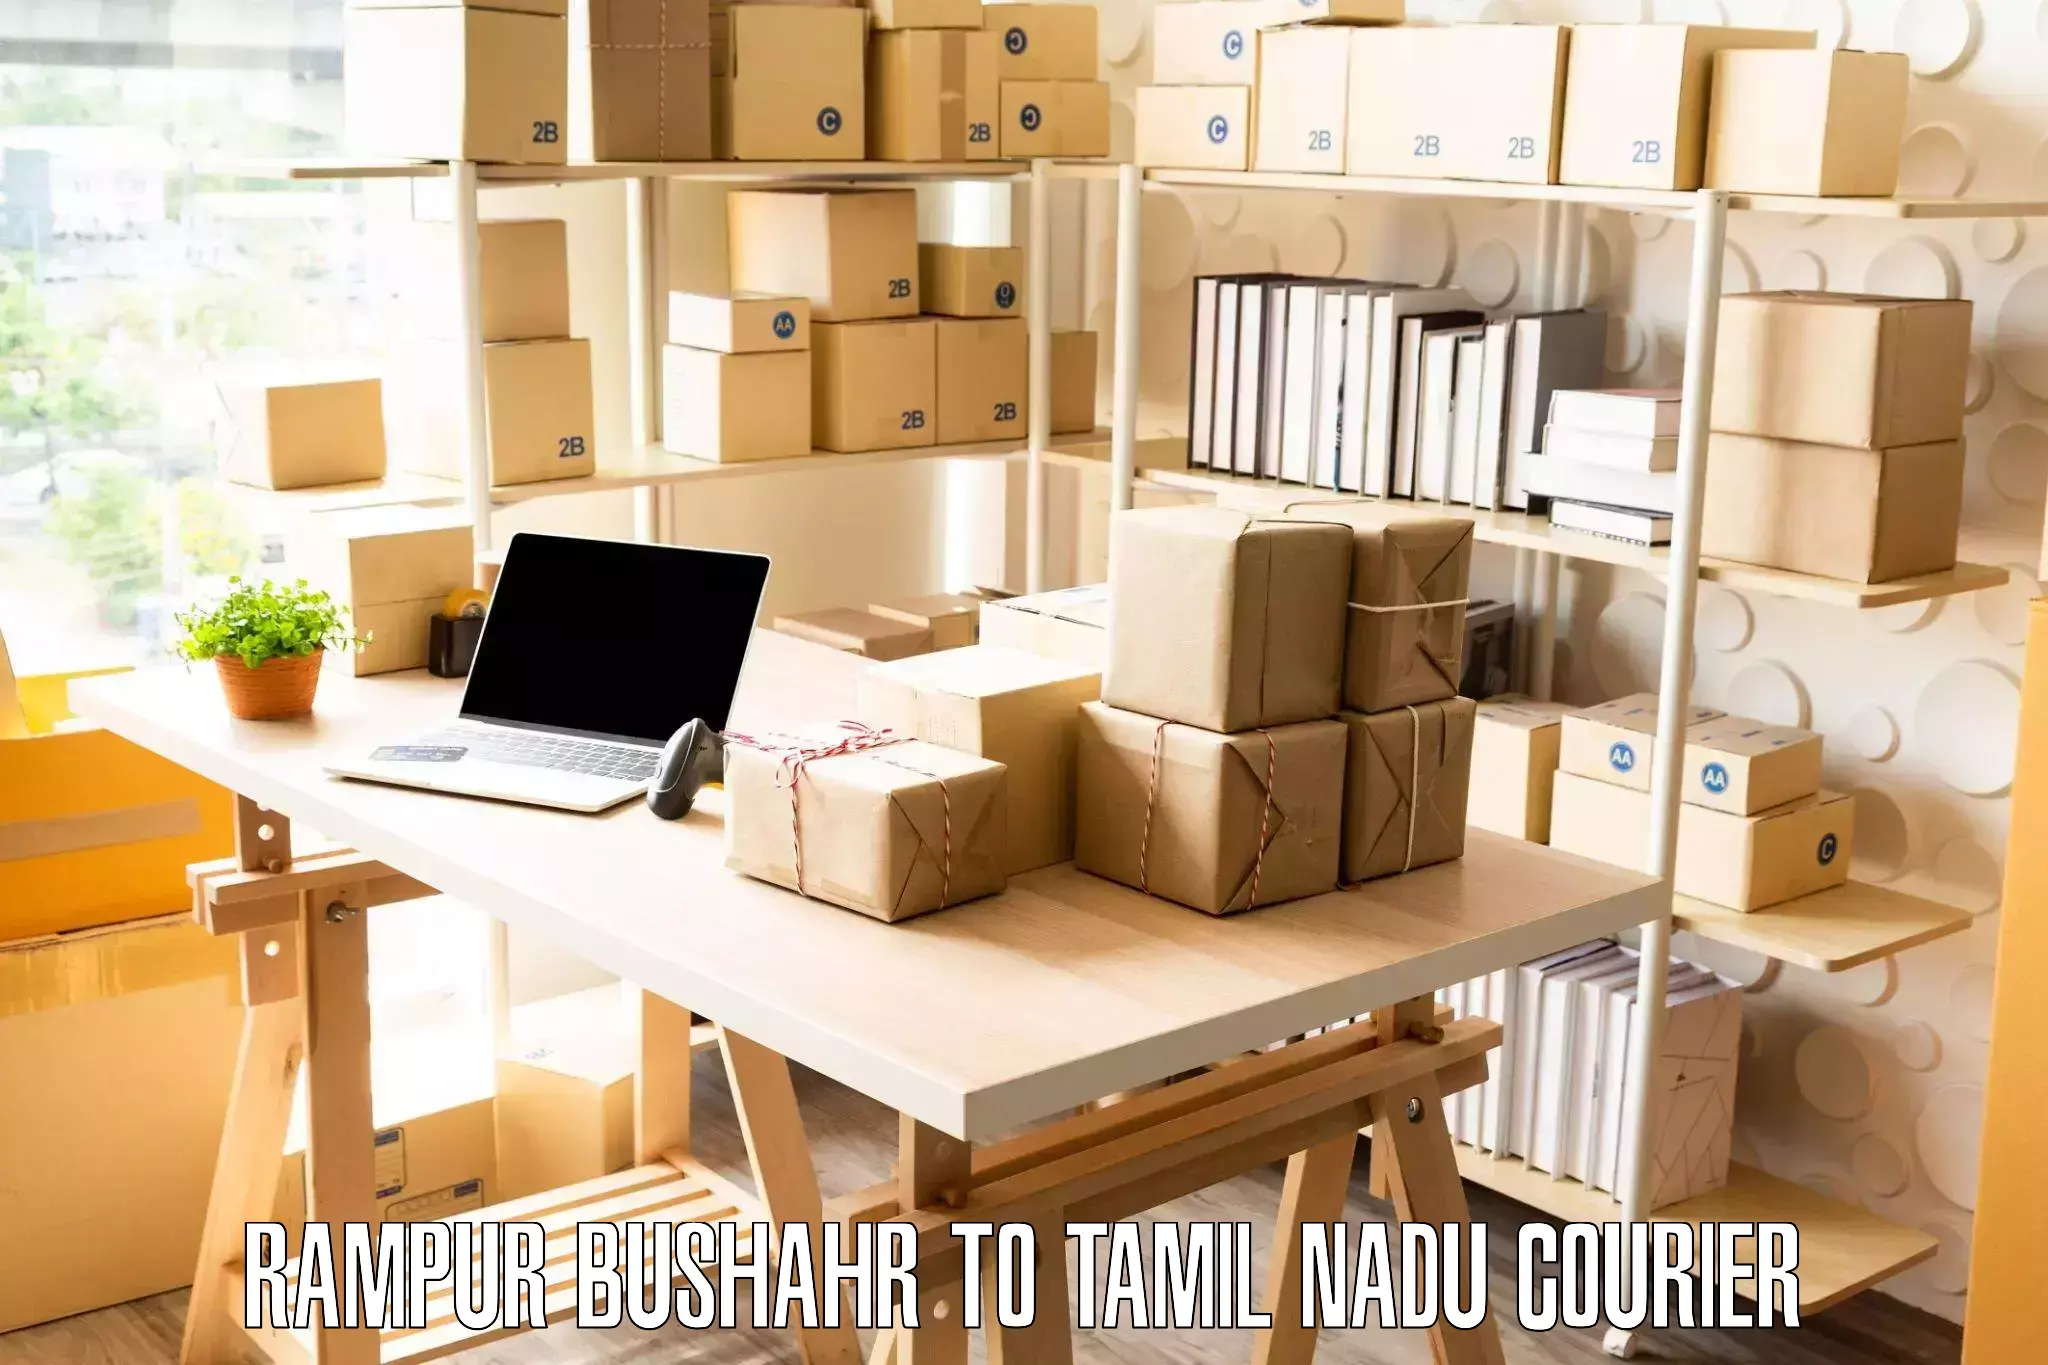 Home moving specialists Rampur Bushahr to Udumalpet